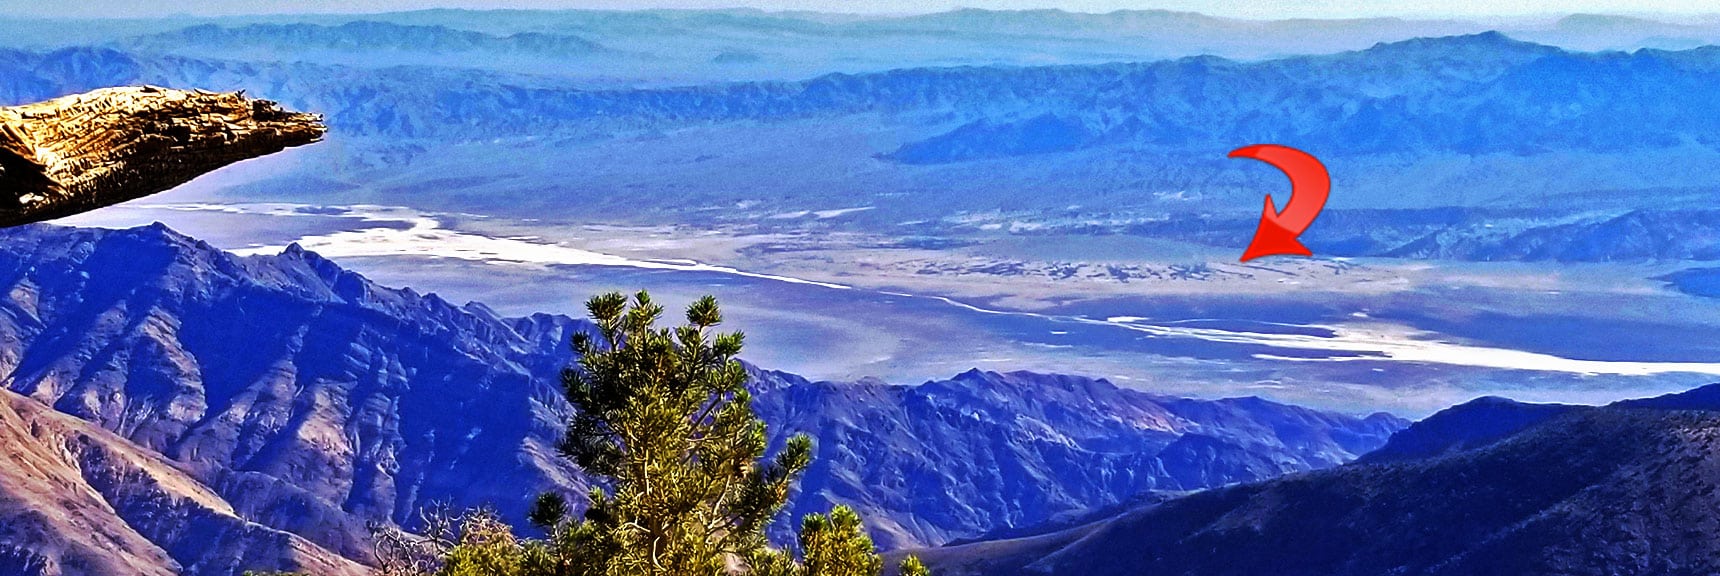 The Mesquite Grove is Visible from Wildrose Peak Across Death Valley | Mesquite Grove | Death Valley, California | David Smith | Las Vegas Area Trails